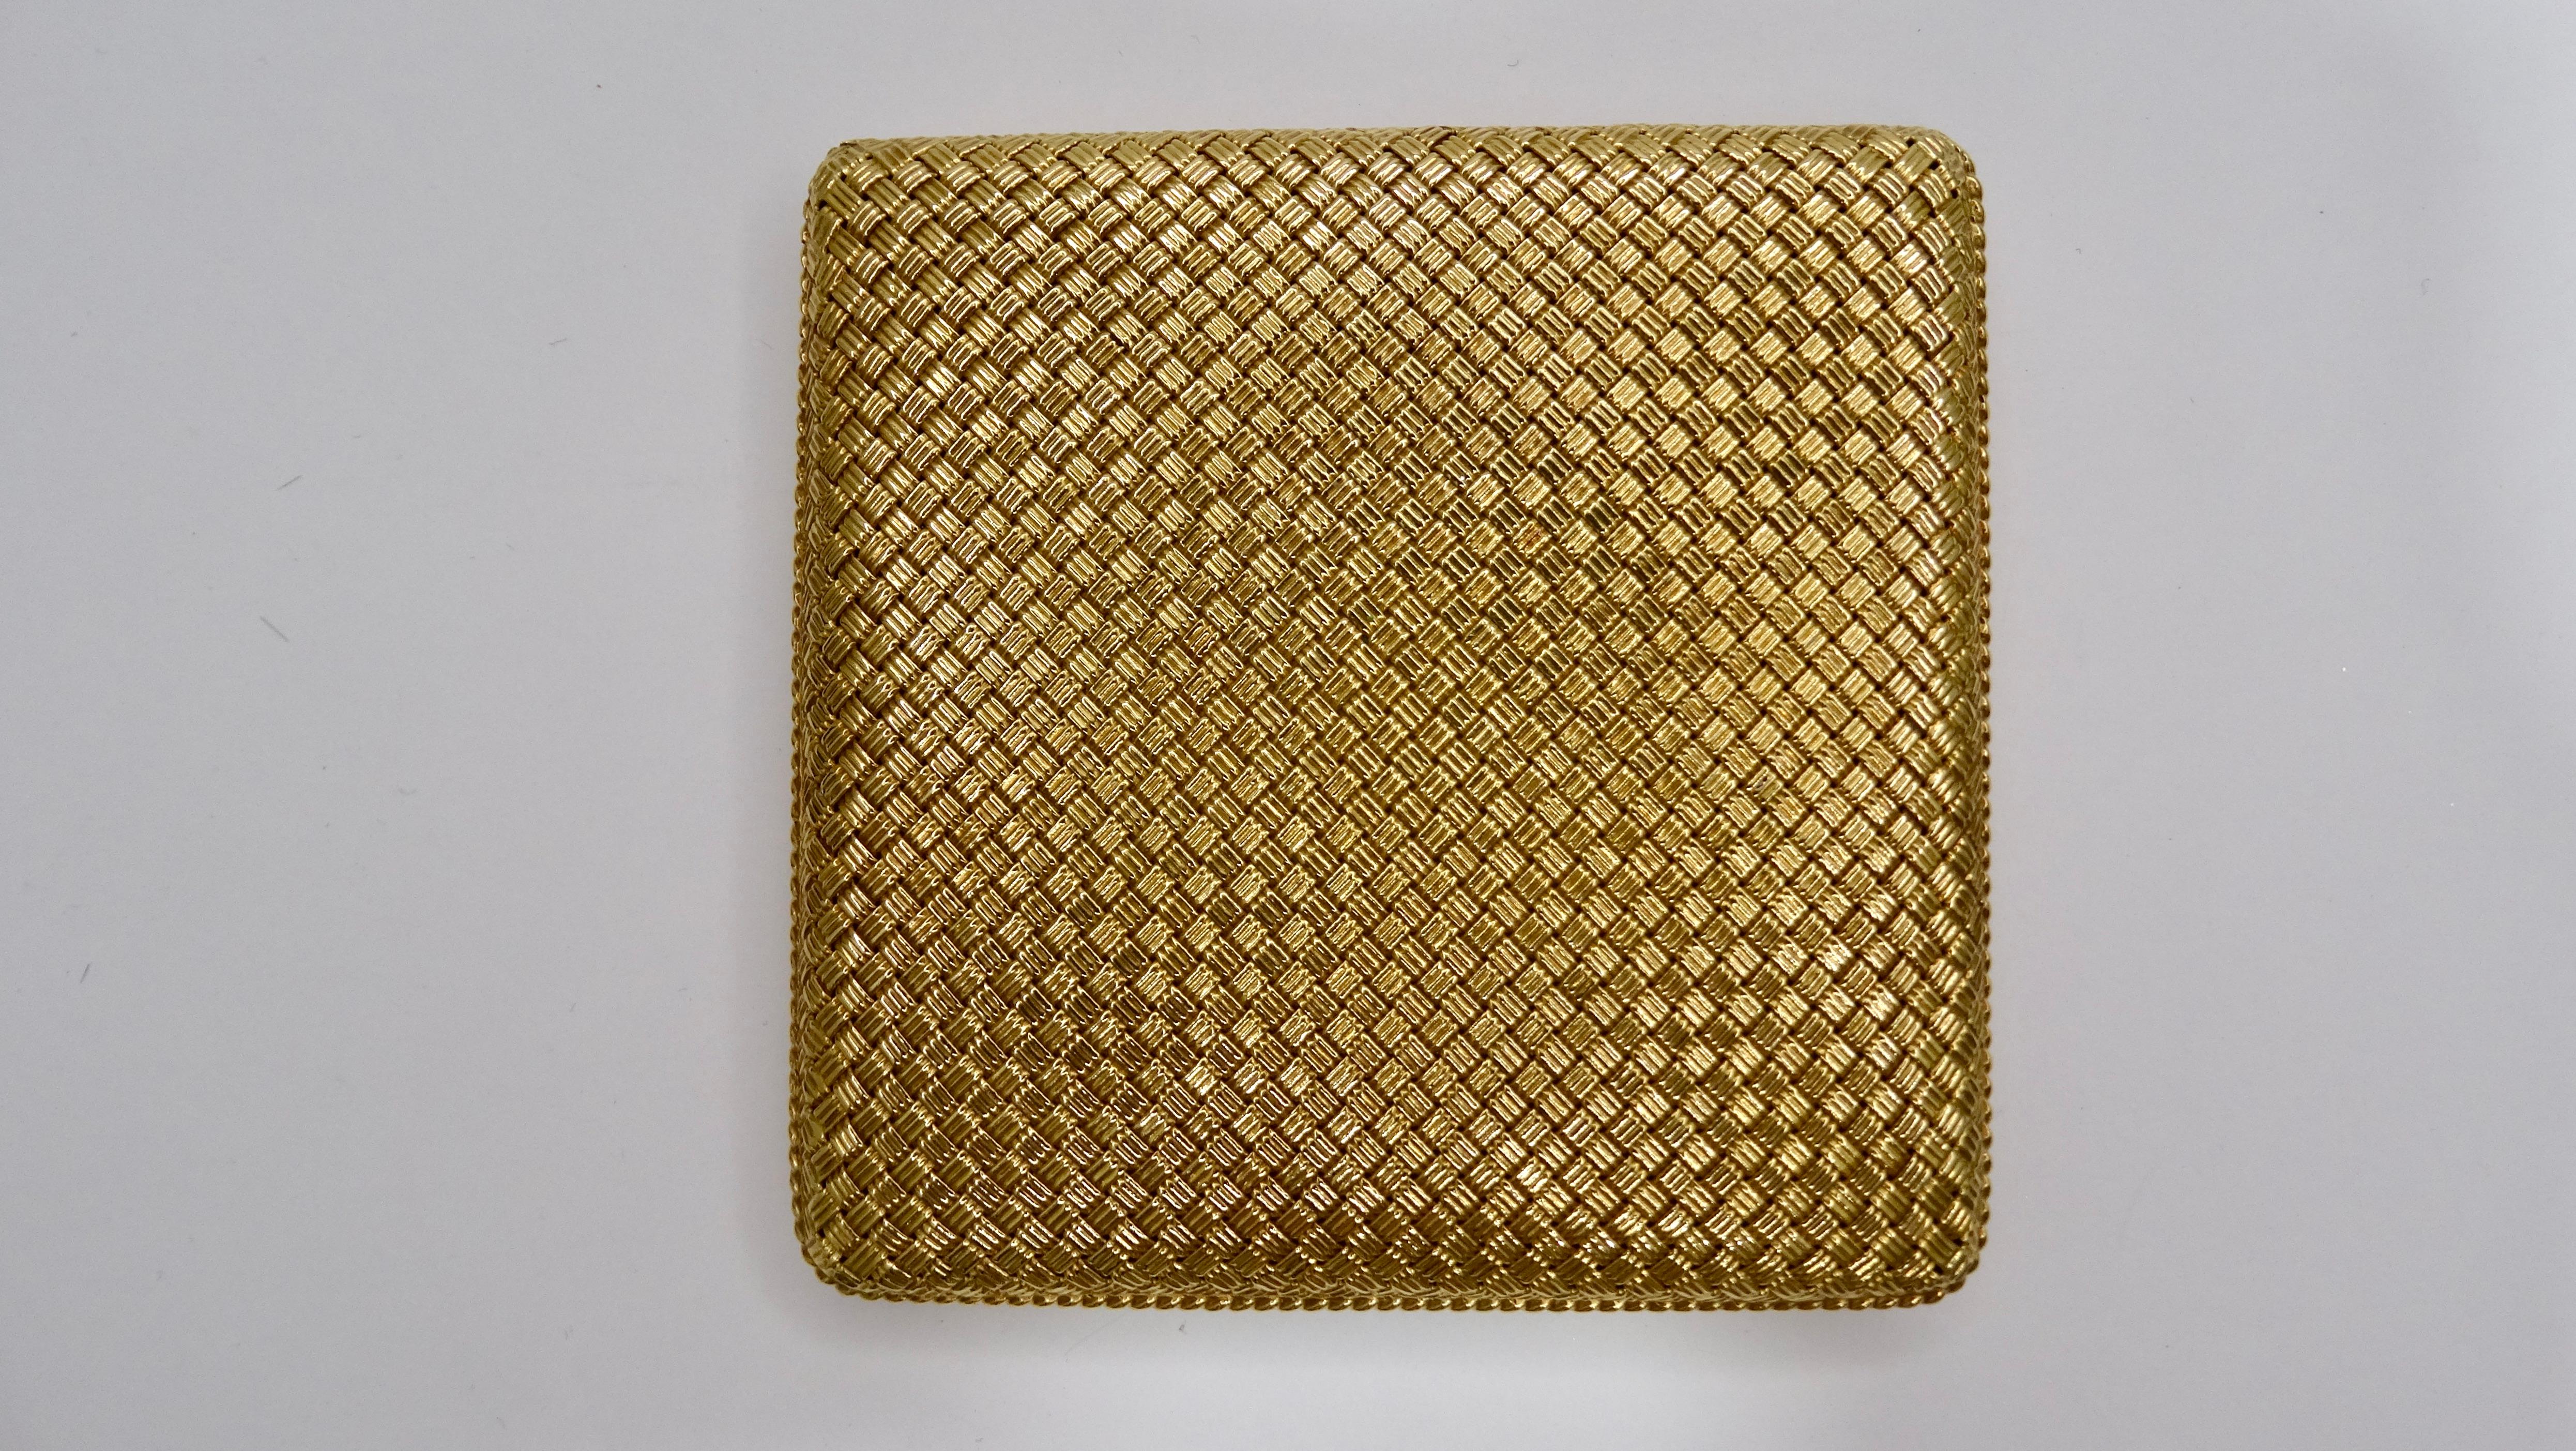 Cartier 18k 750 Yellow Gold and Diamond Compact In Good Condition For Sale In Scottsdale, AZ